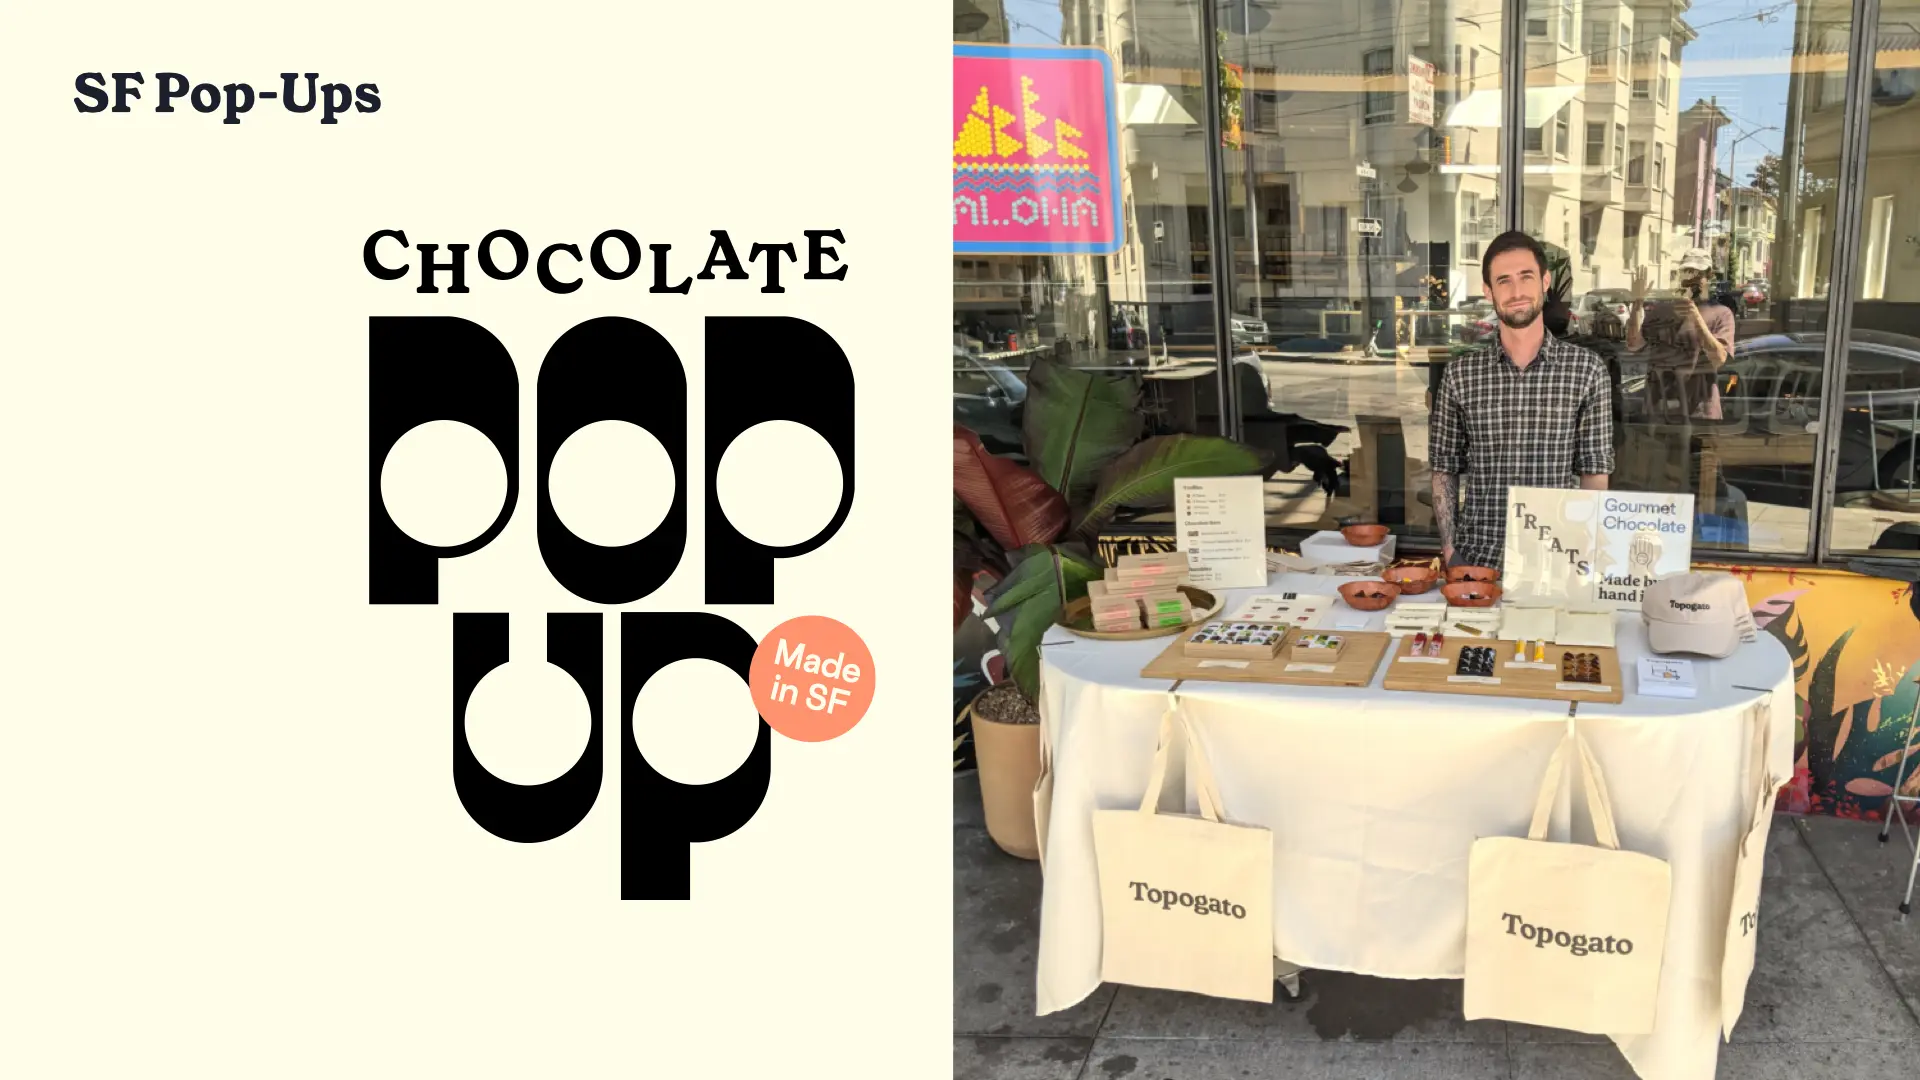 A promotional card for a pop up shop: On the left, the words Chocolate Pop Up, Made in SF and on the right, a photograph of a man standing behind a cloth-covered table covered with chocolates and a sign that reads Gourmet chocolates made by hand in SF.